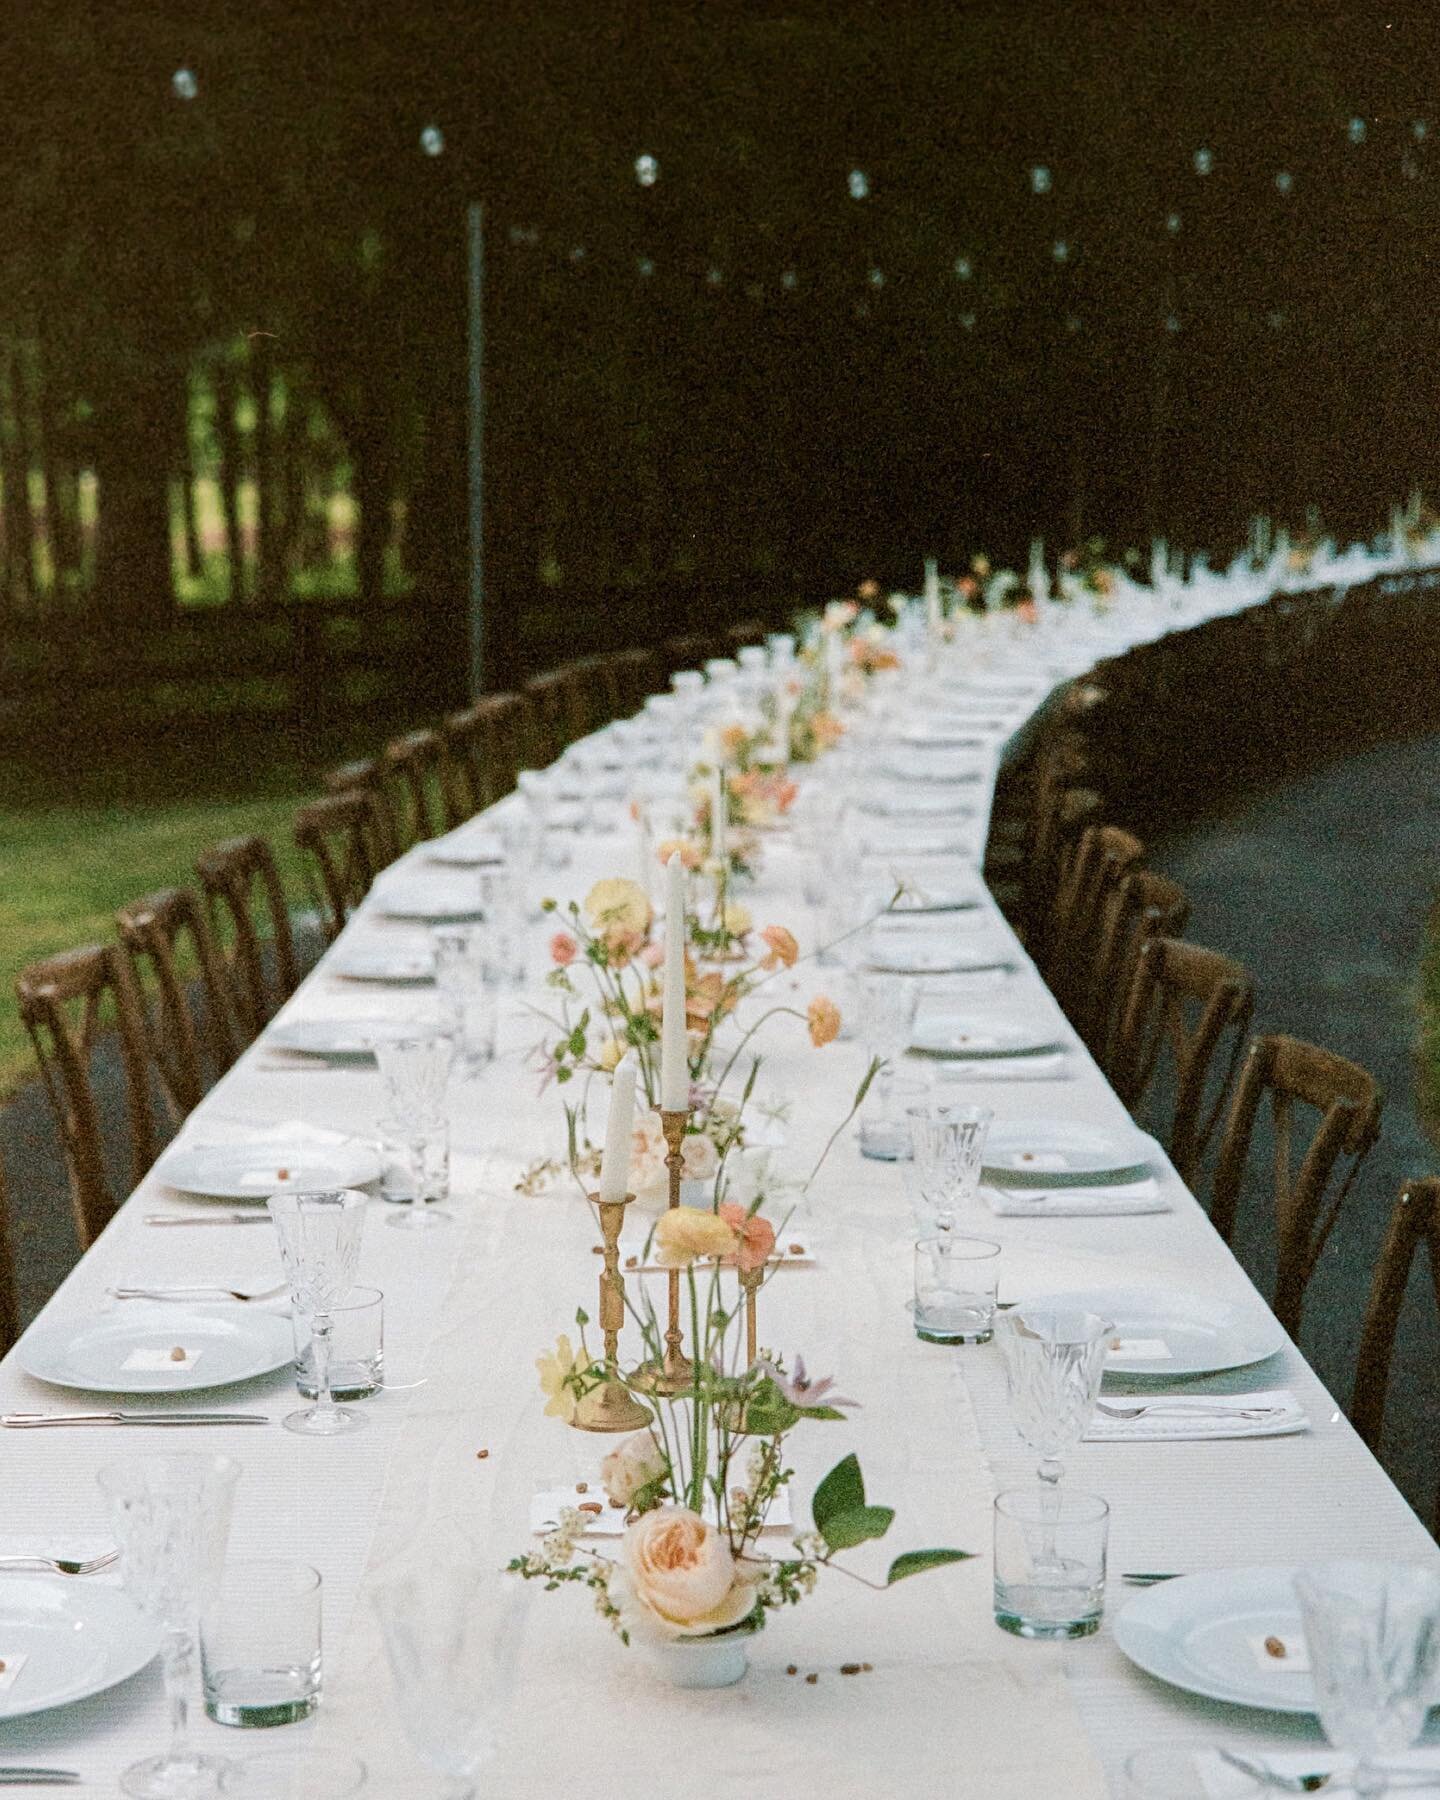 ok, ok, the last chapter of wedding photos for now: my favorite dinner party.

in the months leading up to april 30th, we took countless outings to junk stores to collect all of the white antique napkins and brass candlesticks and ceramic serving pla